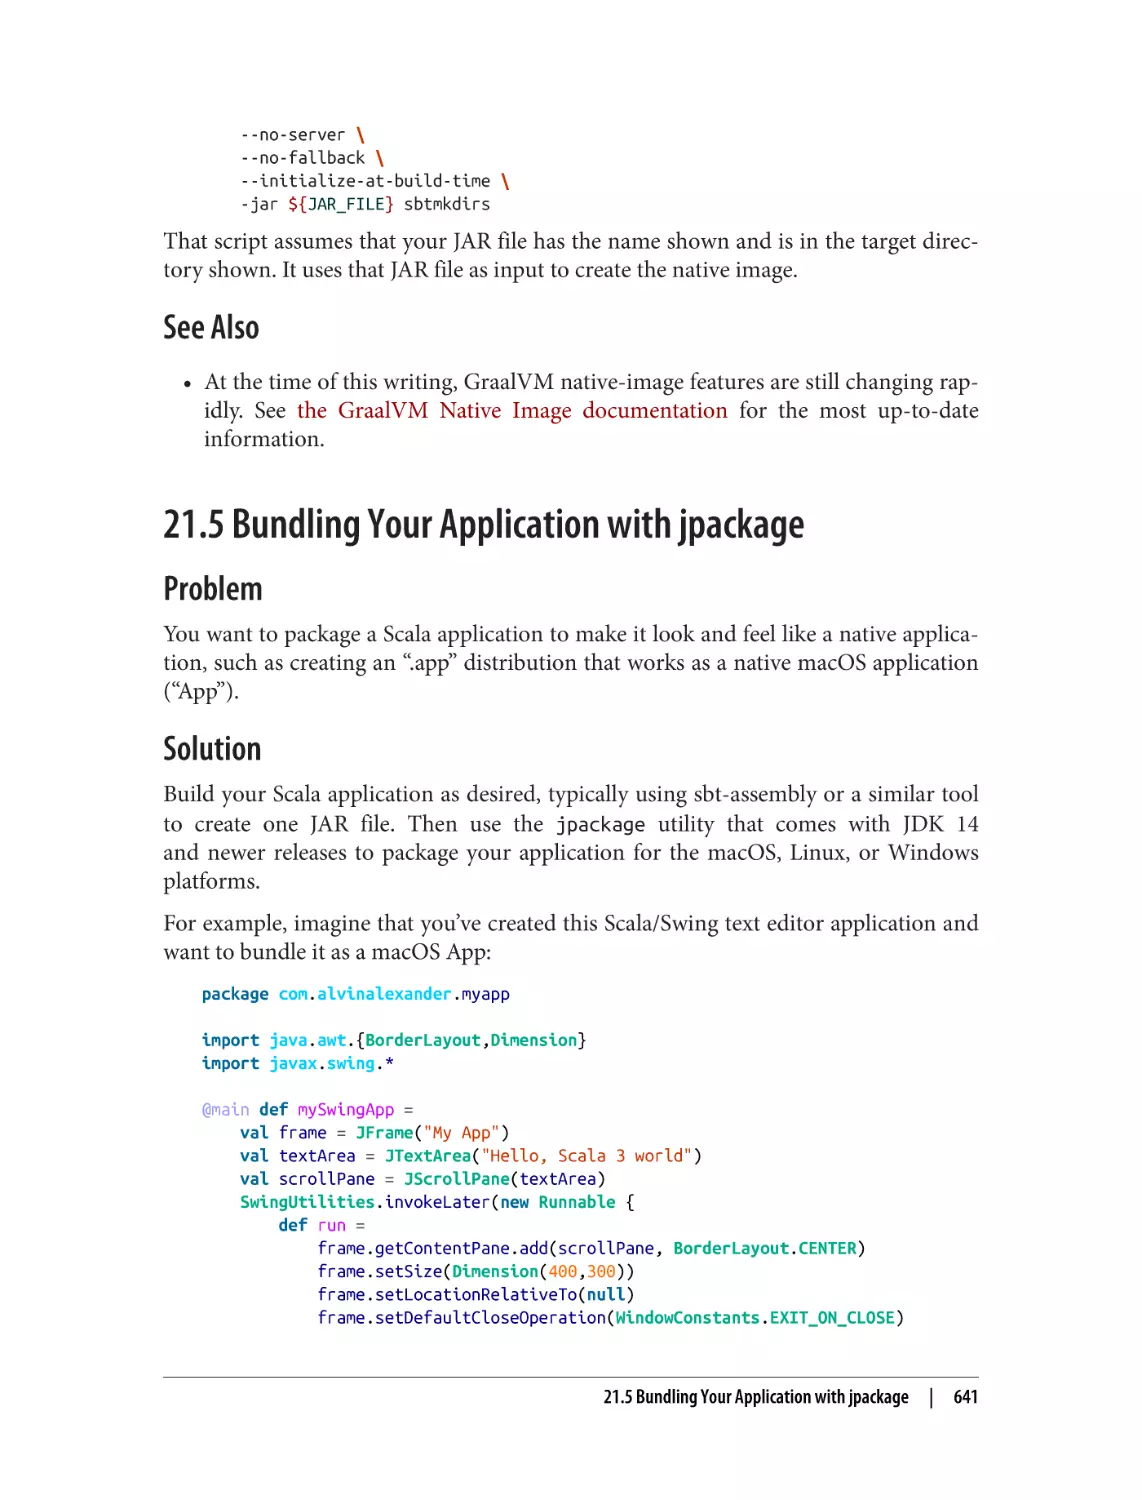 See Also
21.5 Bundling Your Application with jpackage
Problem
Solution